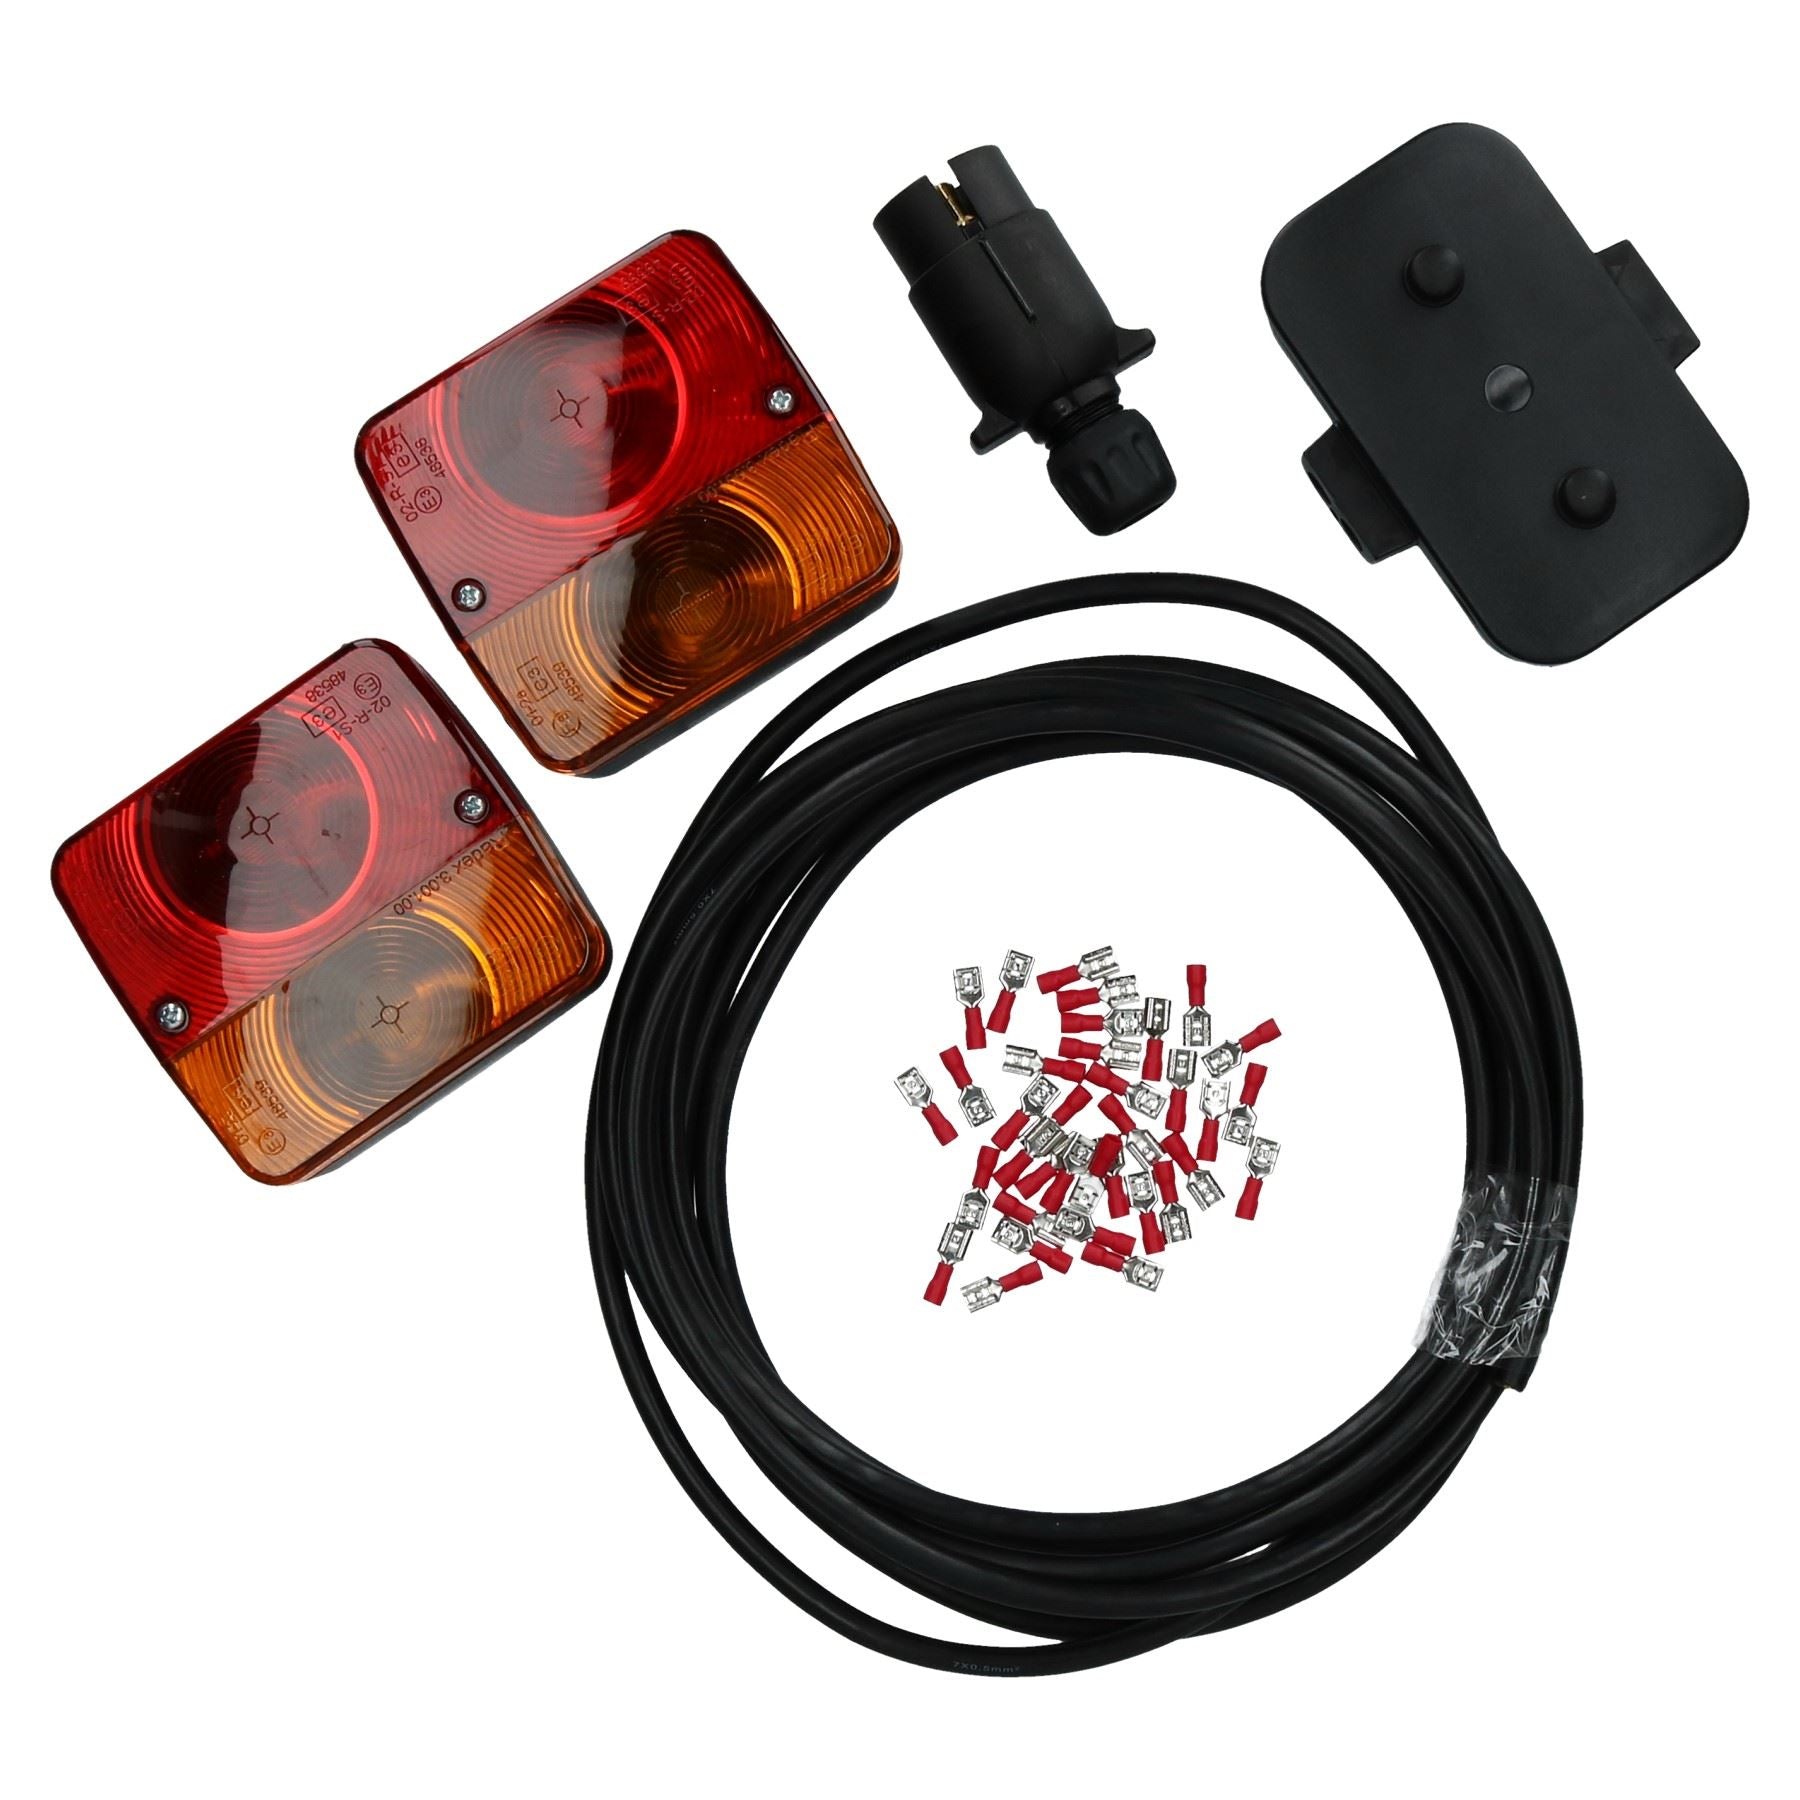 Trailer Light Wiring Kit - Small Lights, Plug, Junction Box, 5m Wire, Terminals